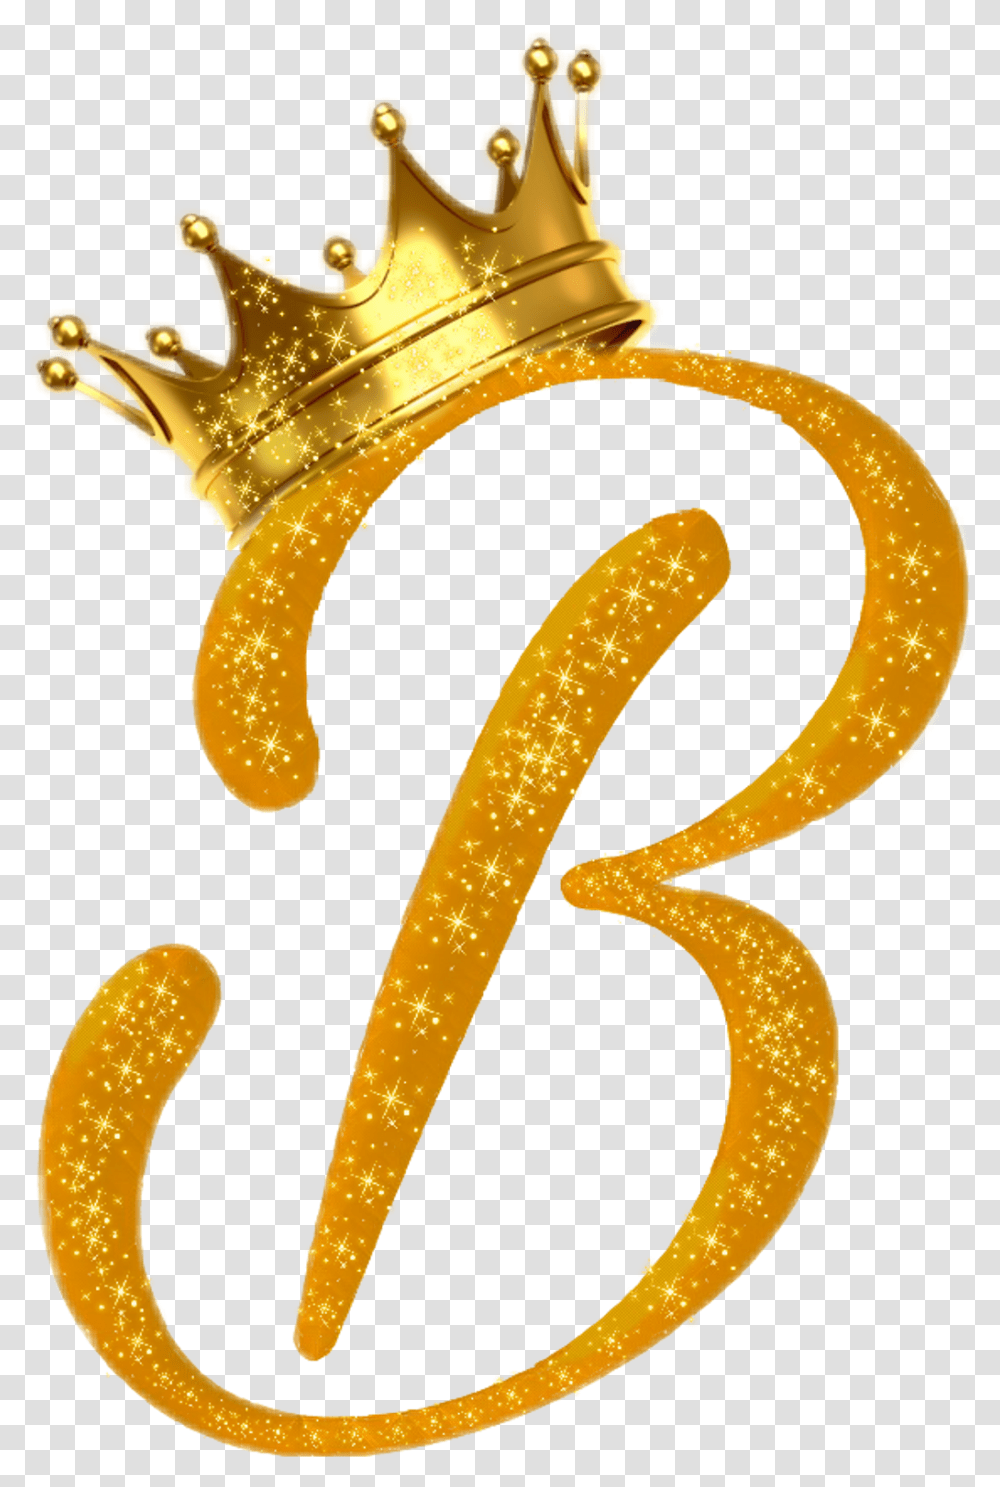 Download Letters Letter B Gold Crown Royal Clip Library Gold Letter B With Crown, Accessories, Accessory, Food, Jewelry Transparent Png